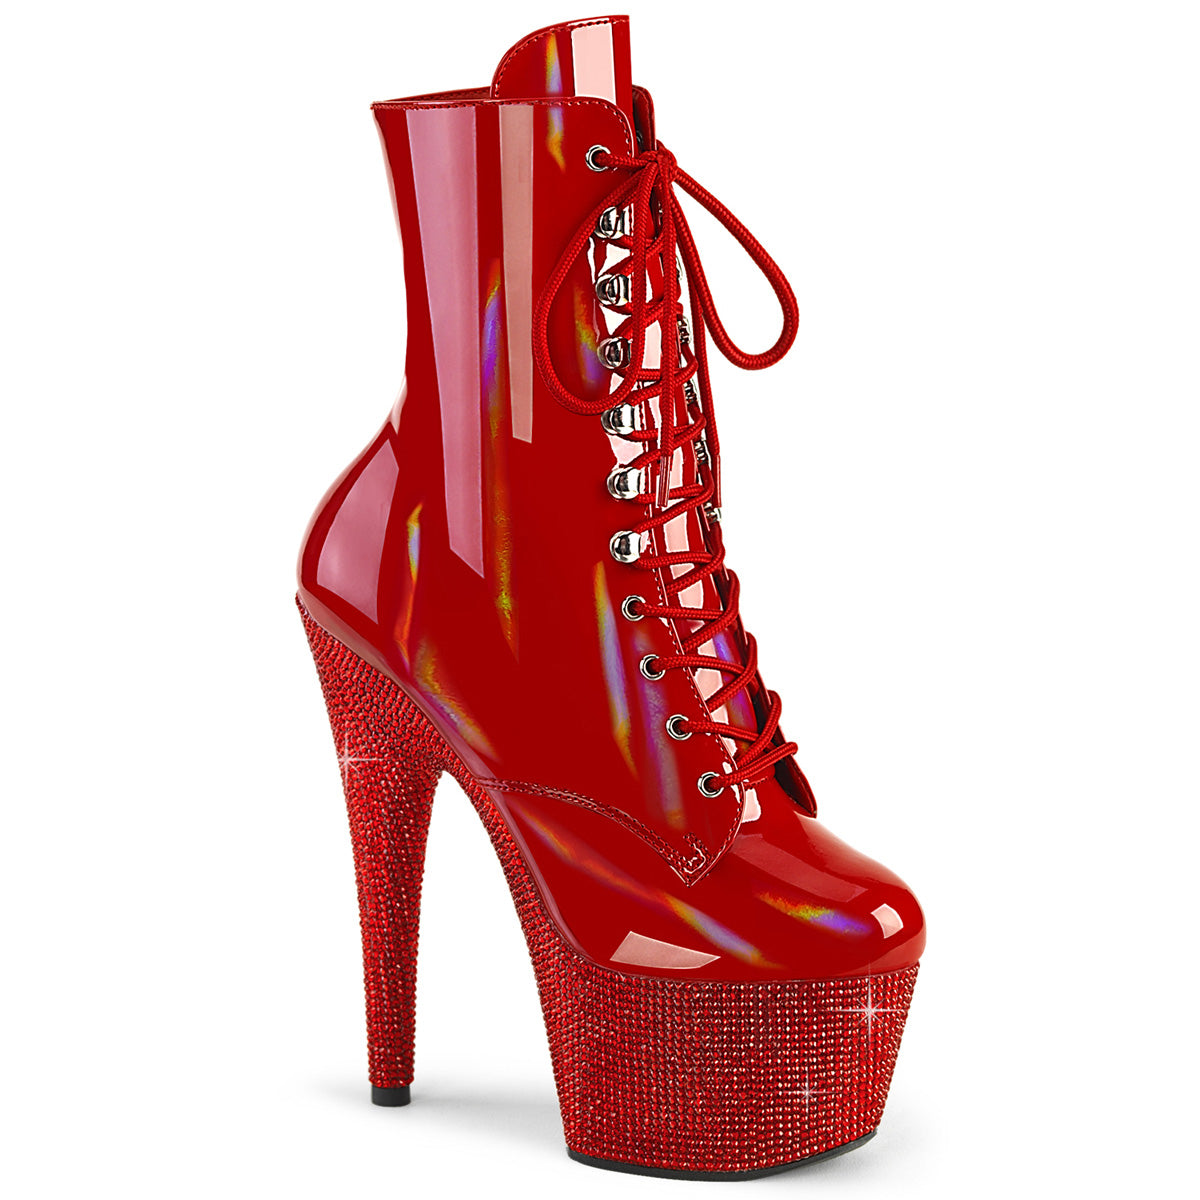 7 Inch Heel BEJEWELED-1020-7 Red Holo